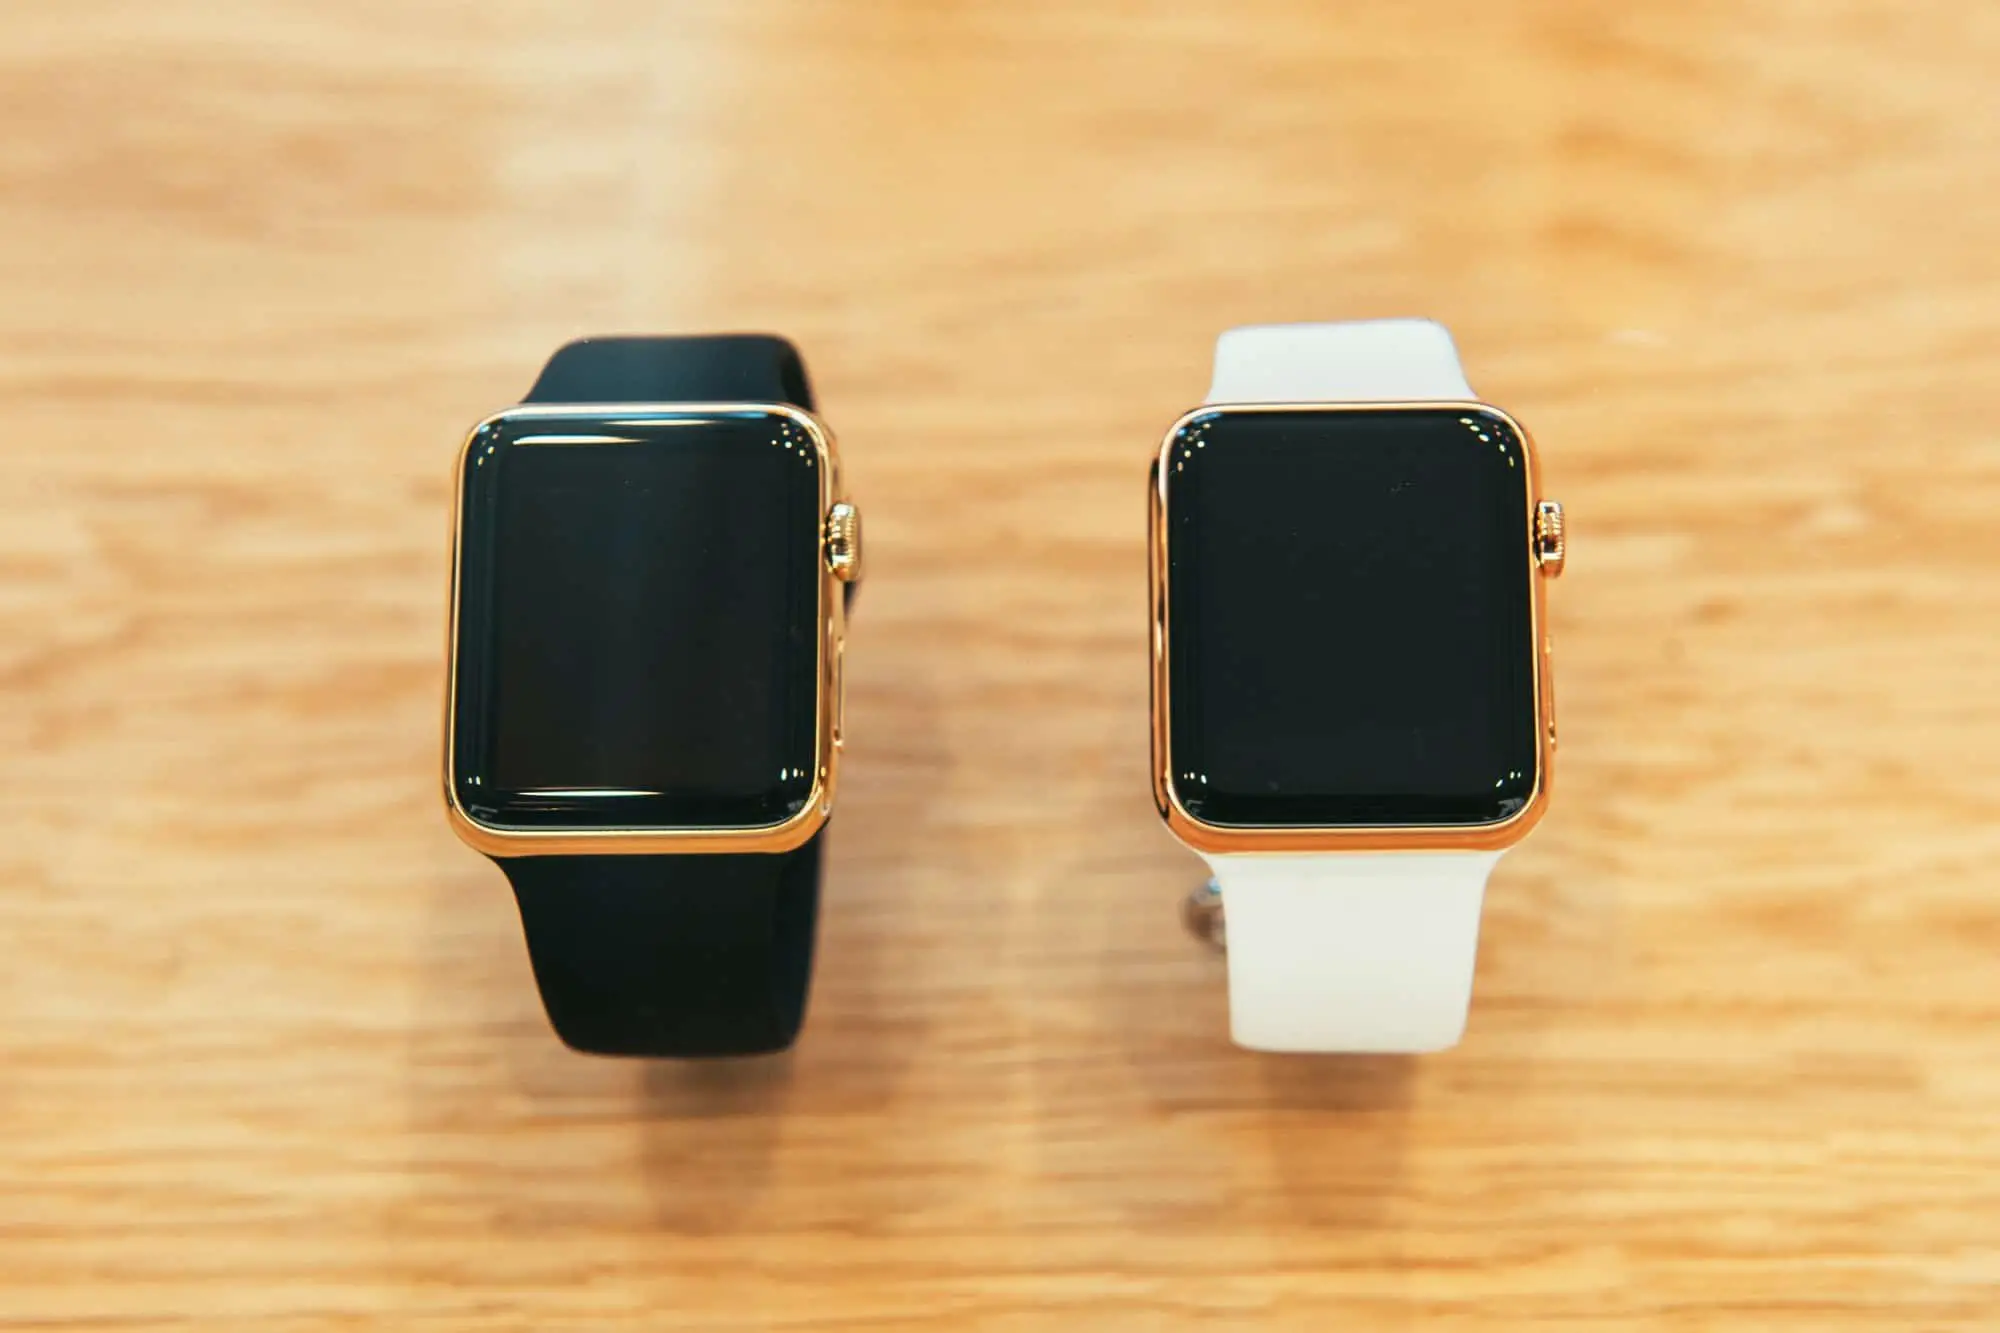 Apple Watch starts selling worldwide - first smartwatch from Apple Computers